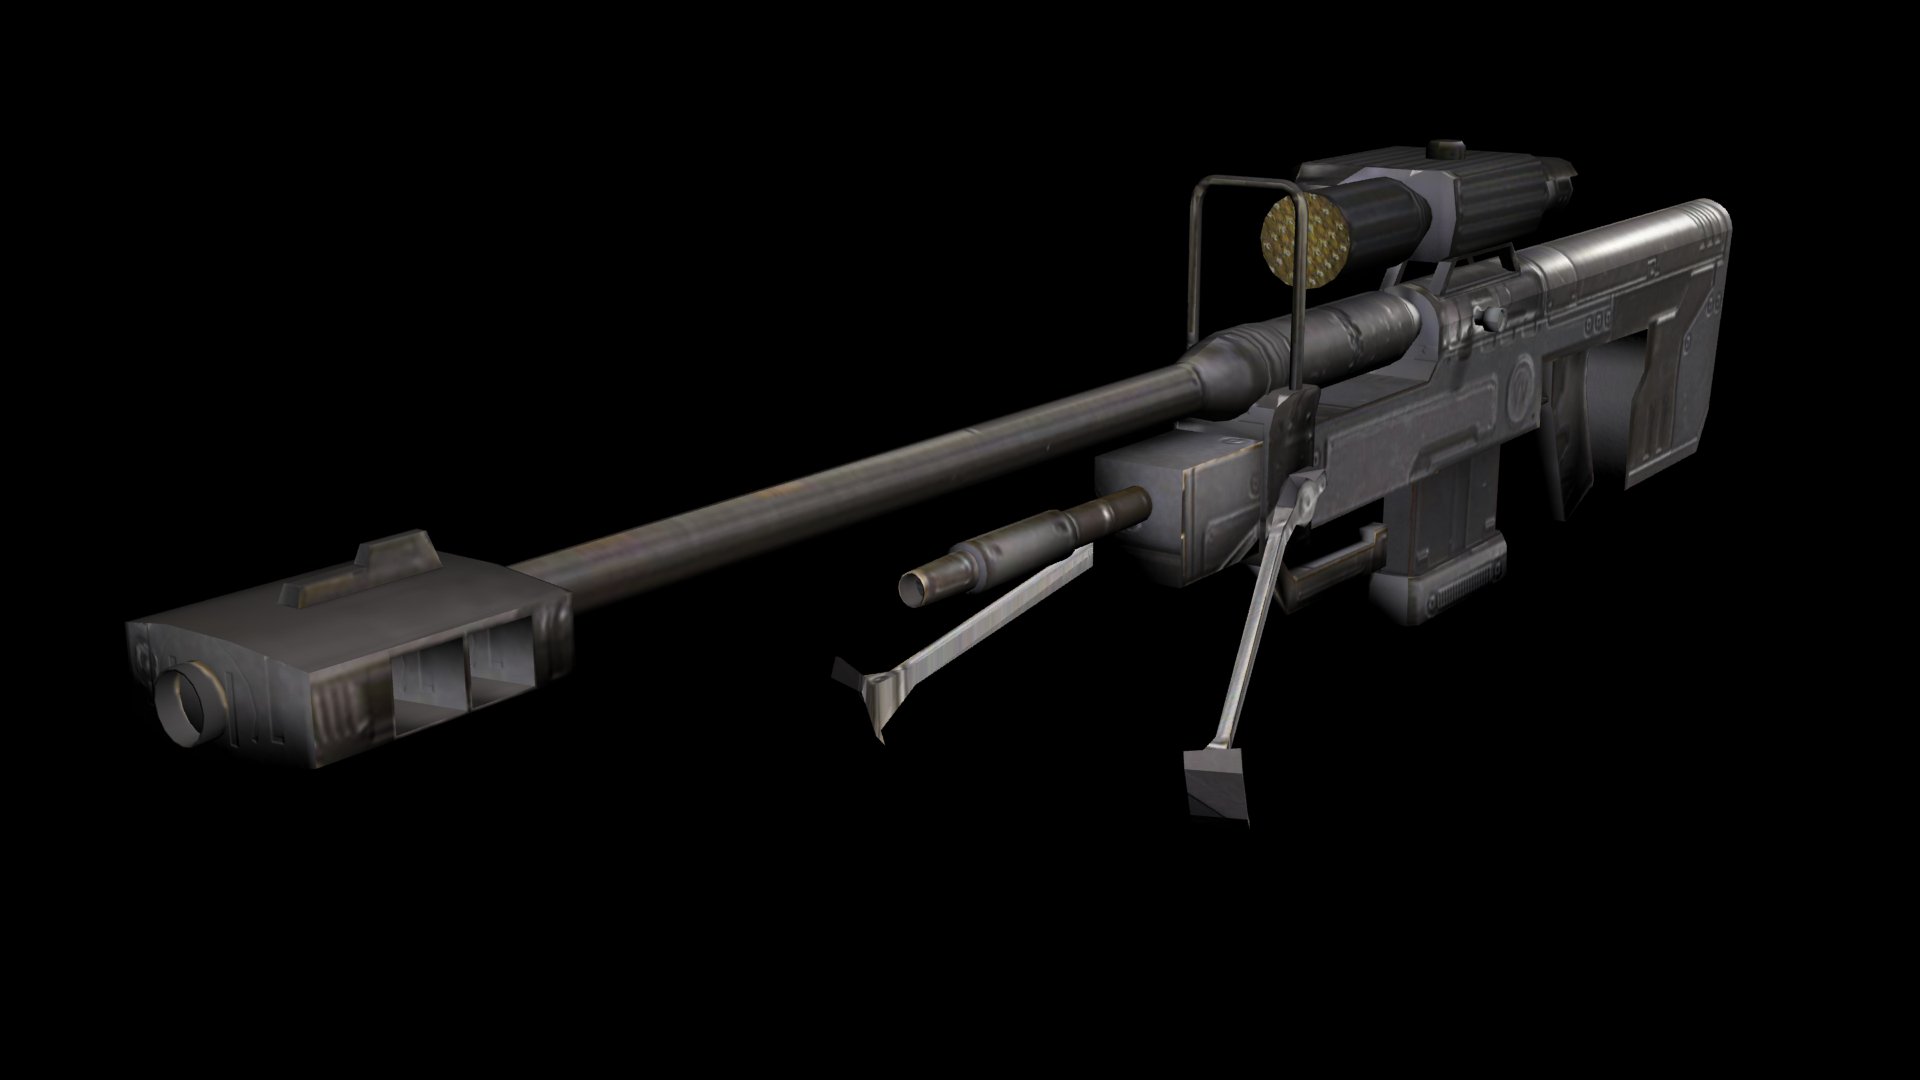 Halo_3_Sniper_Rifle_by_TomGraham.jpg